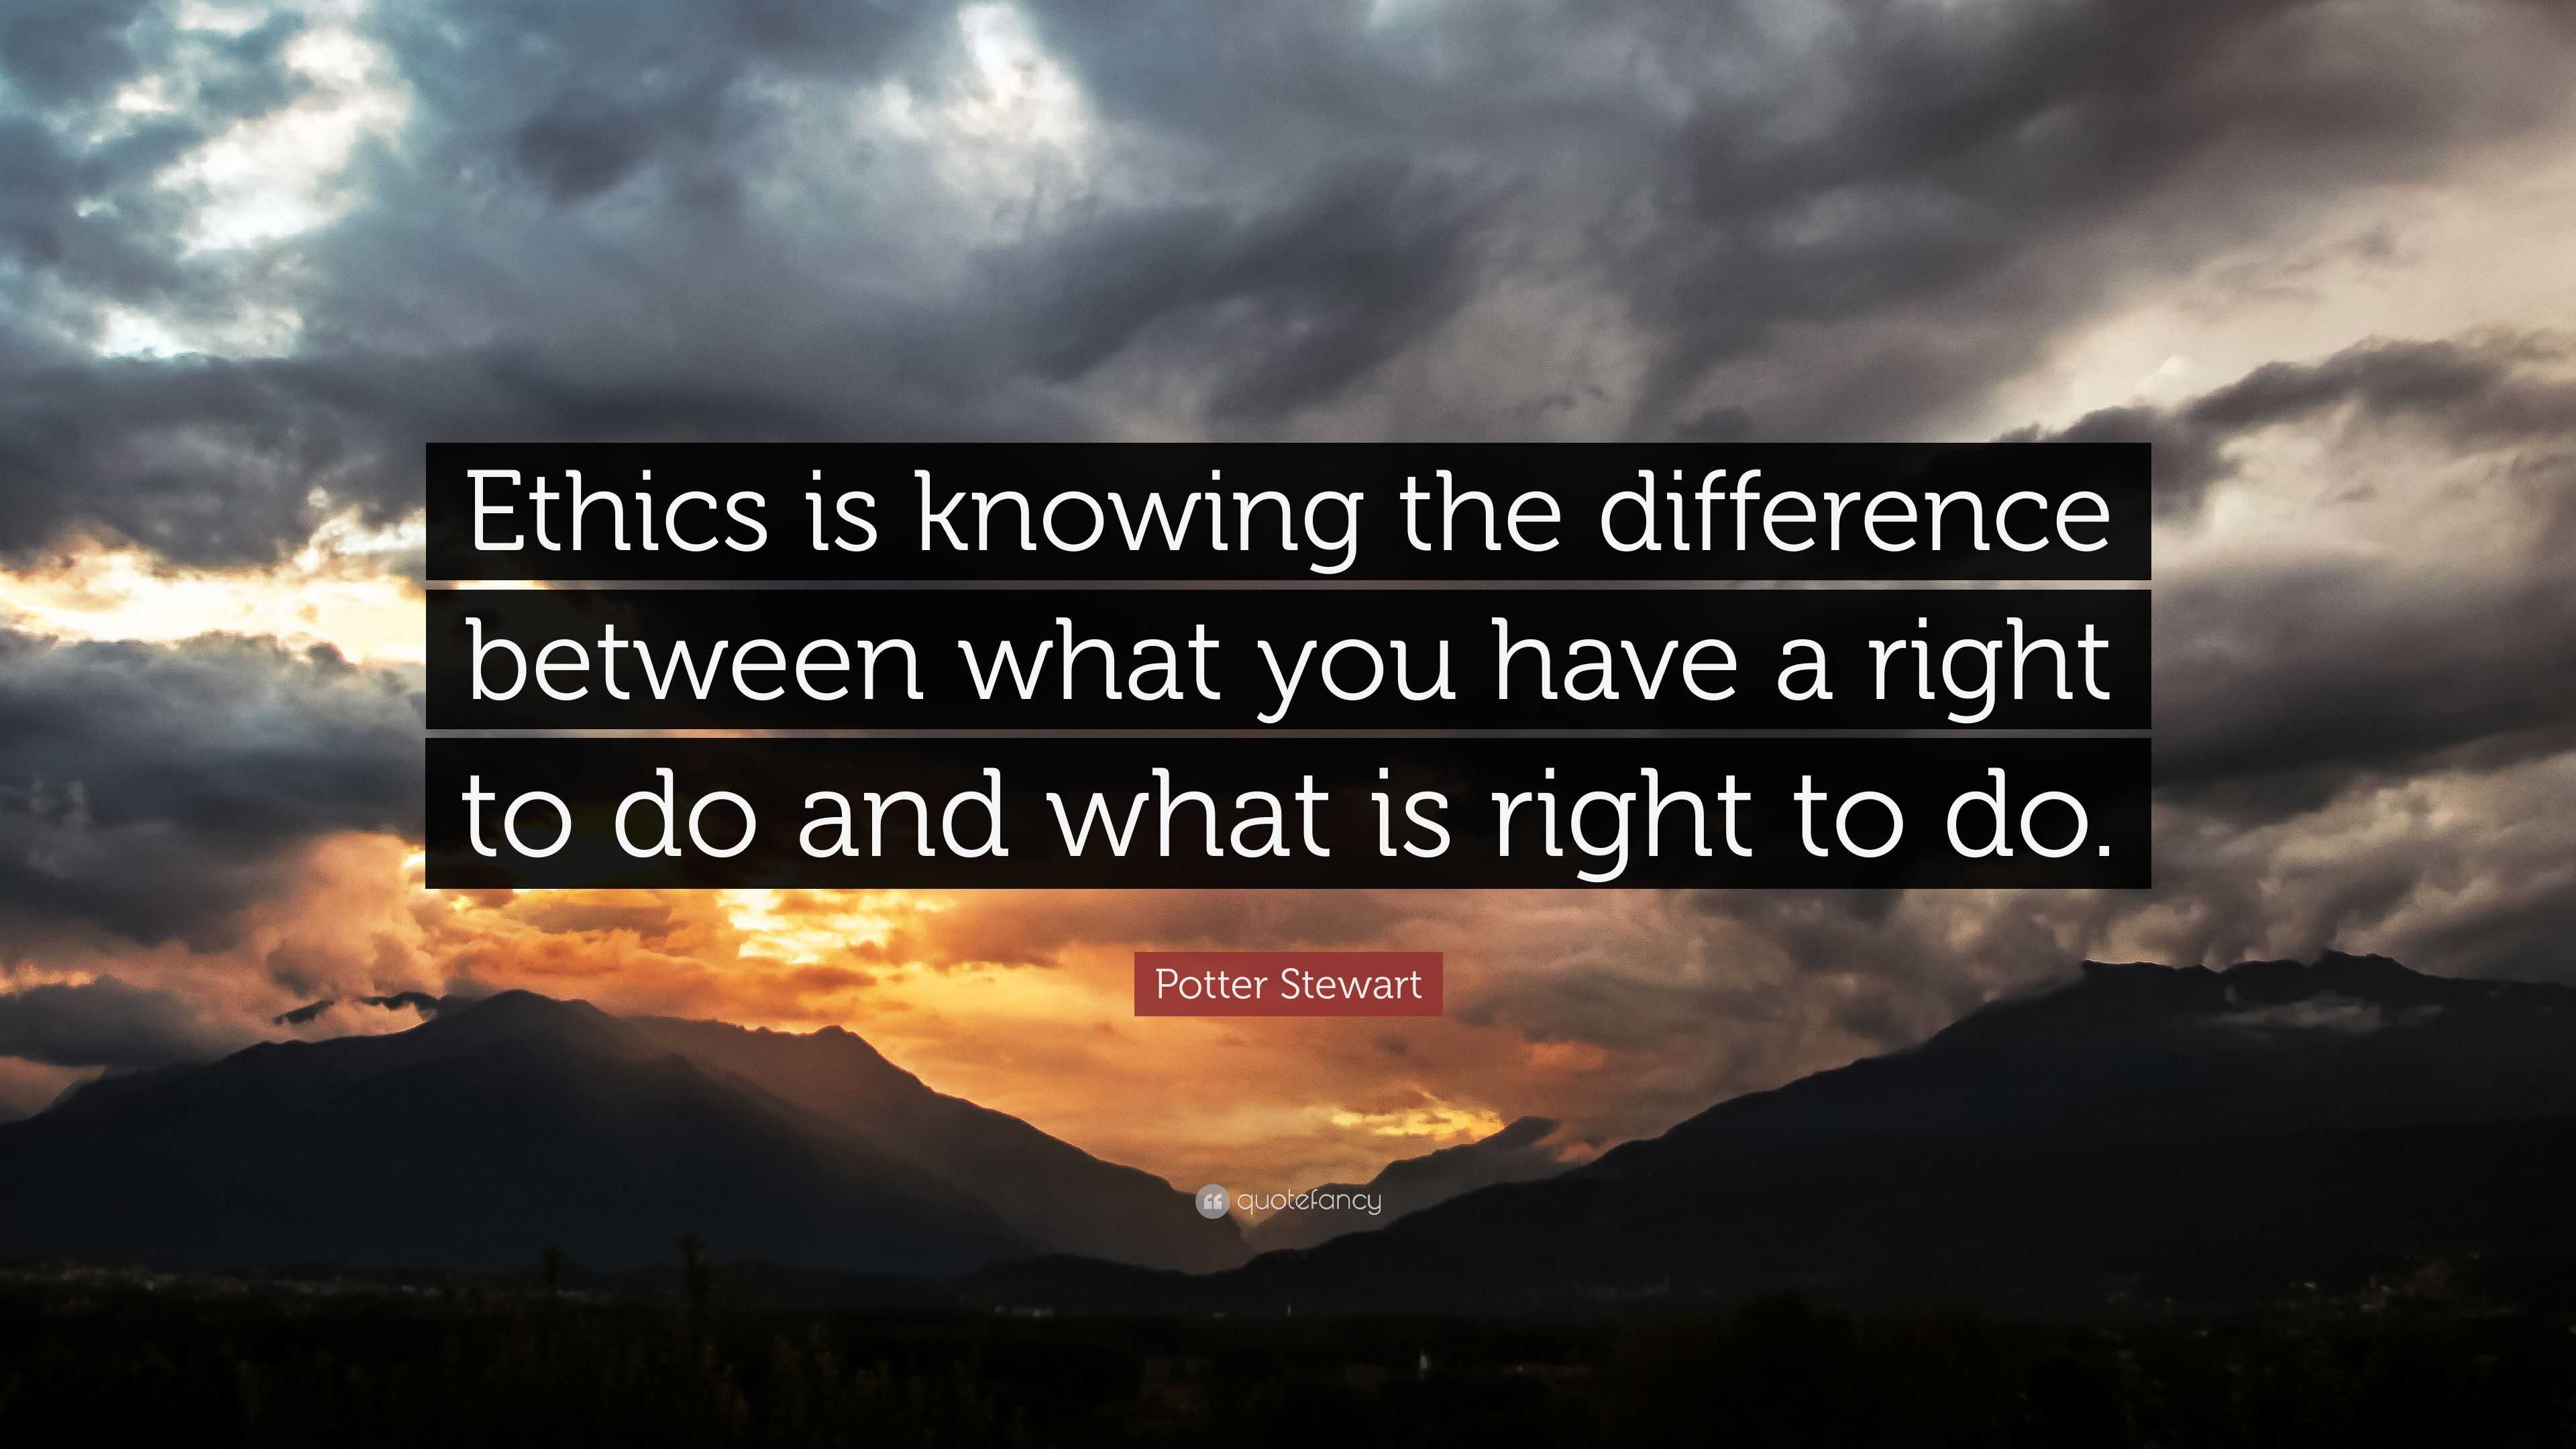 Potter Stewart Quote: “Ethics is knowing the difference between what